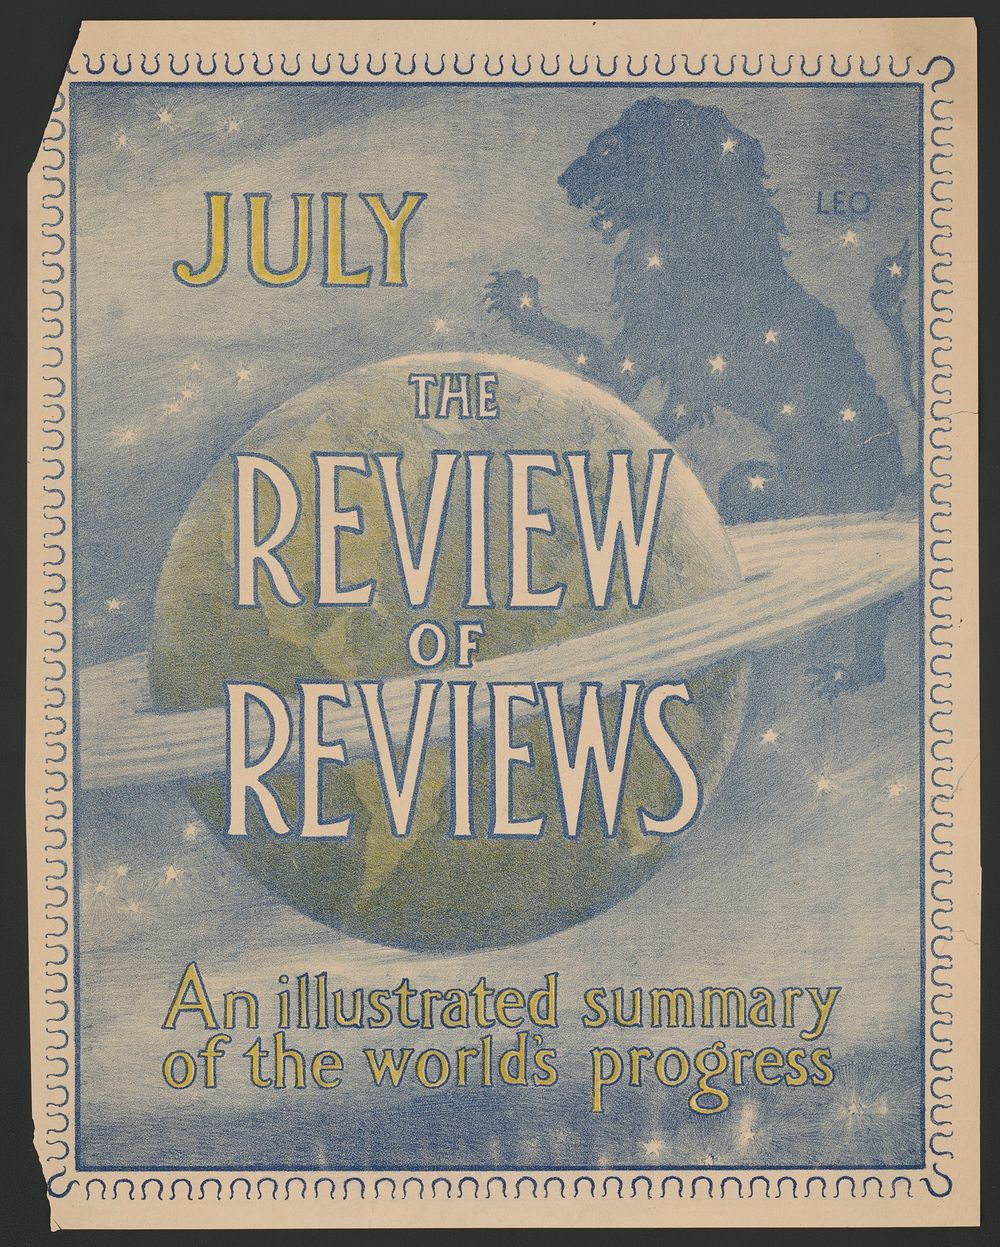 The Review of Reviews. An illustrated summary of the world's progress. July